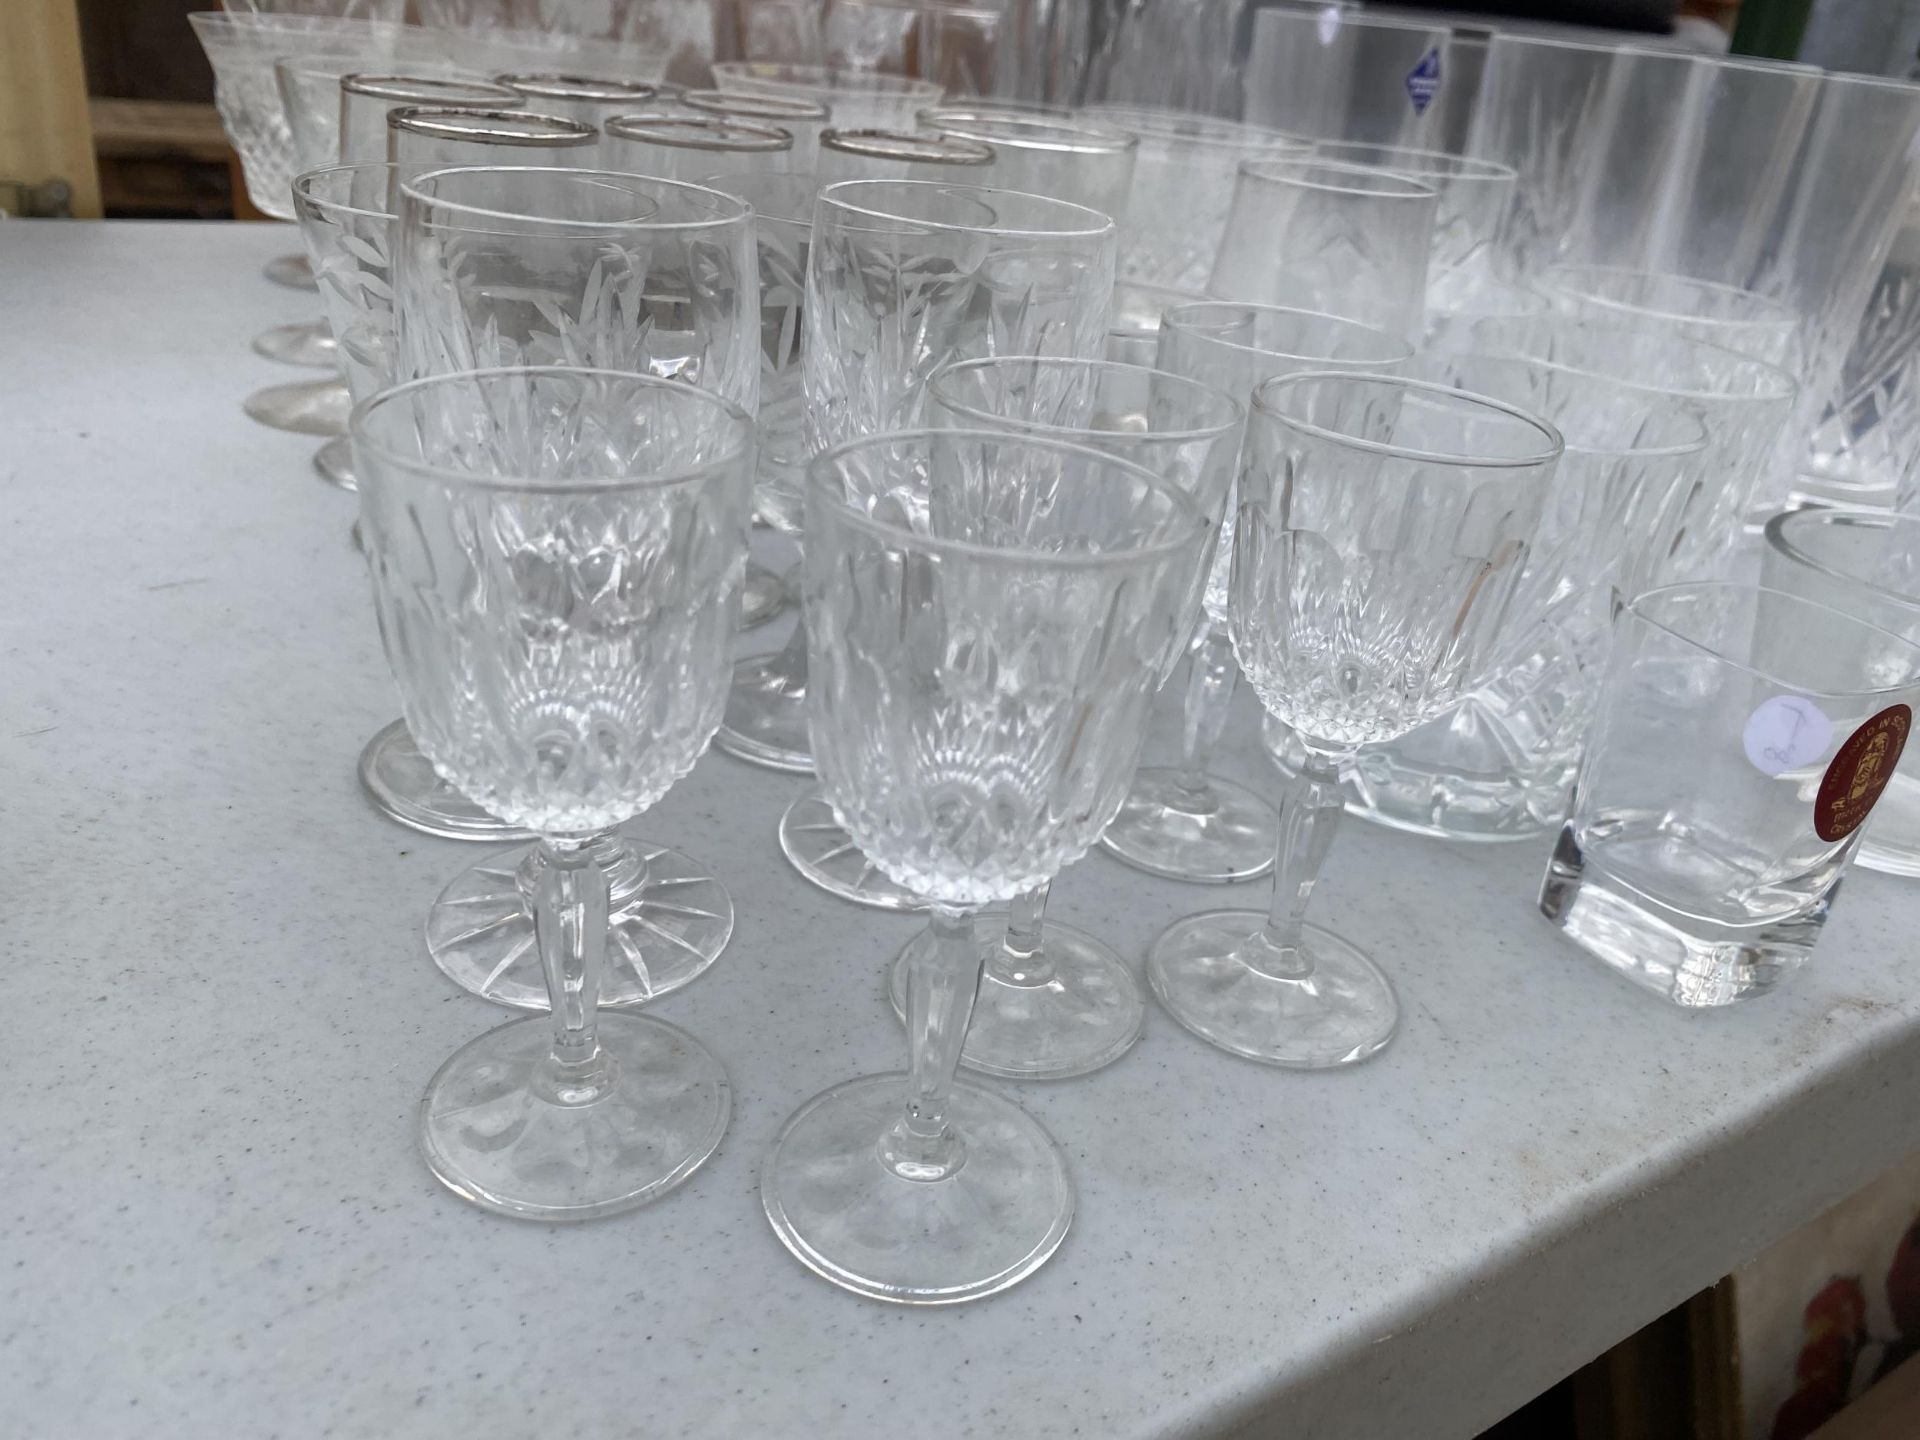 AN ASSORTMENT OF GLASS WARE TO INCLUDE EDINBURGH CRYSTAL TUMBLERS, SHERRY GLASSES AND WINE GLASSES - Image 6 of 6